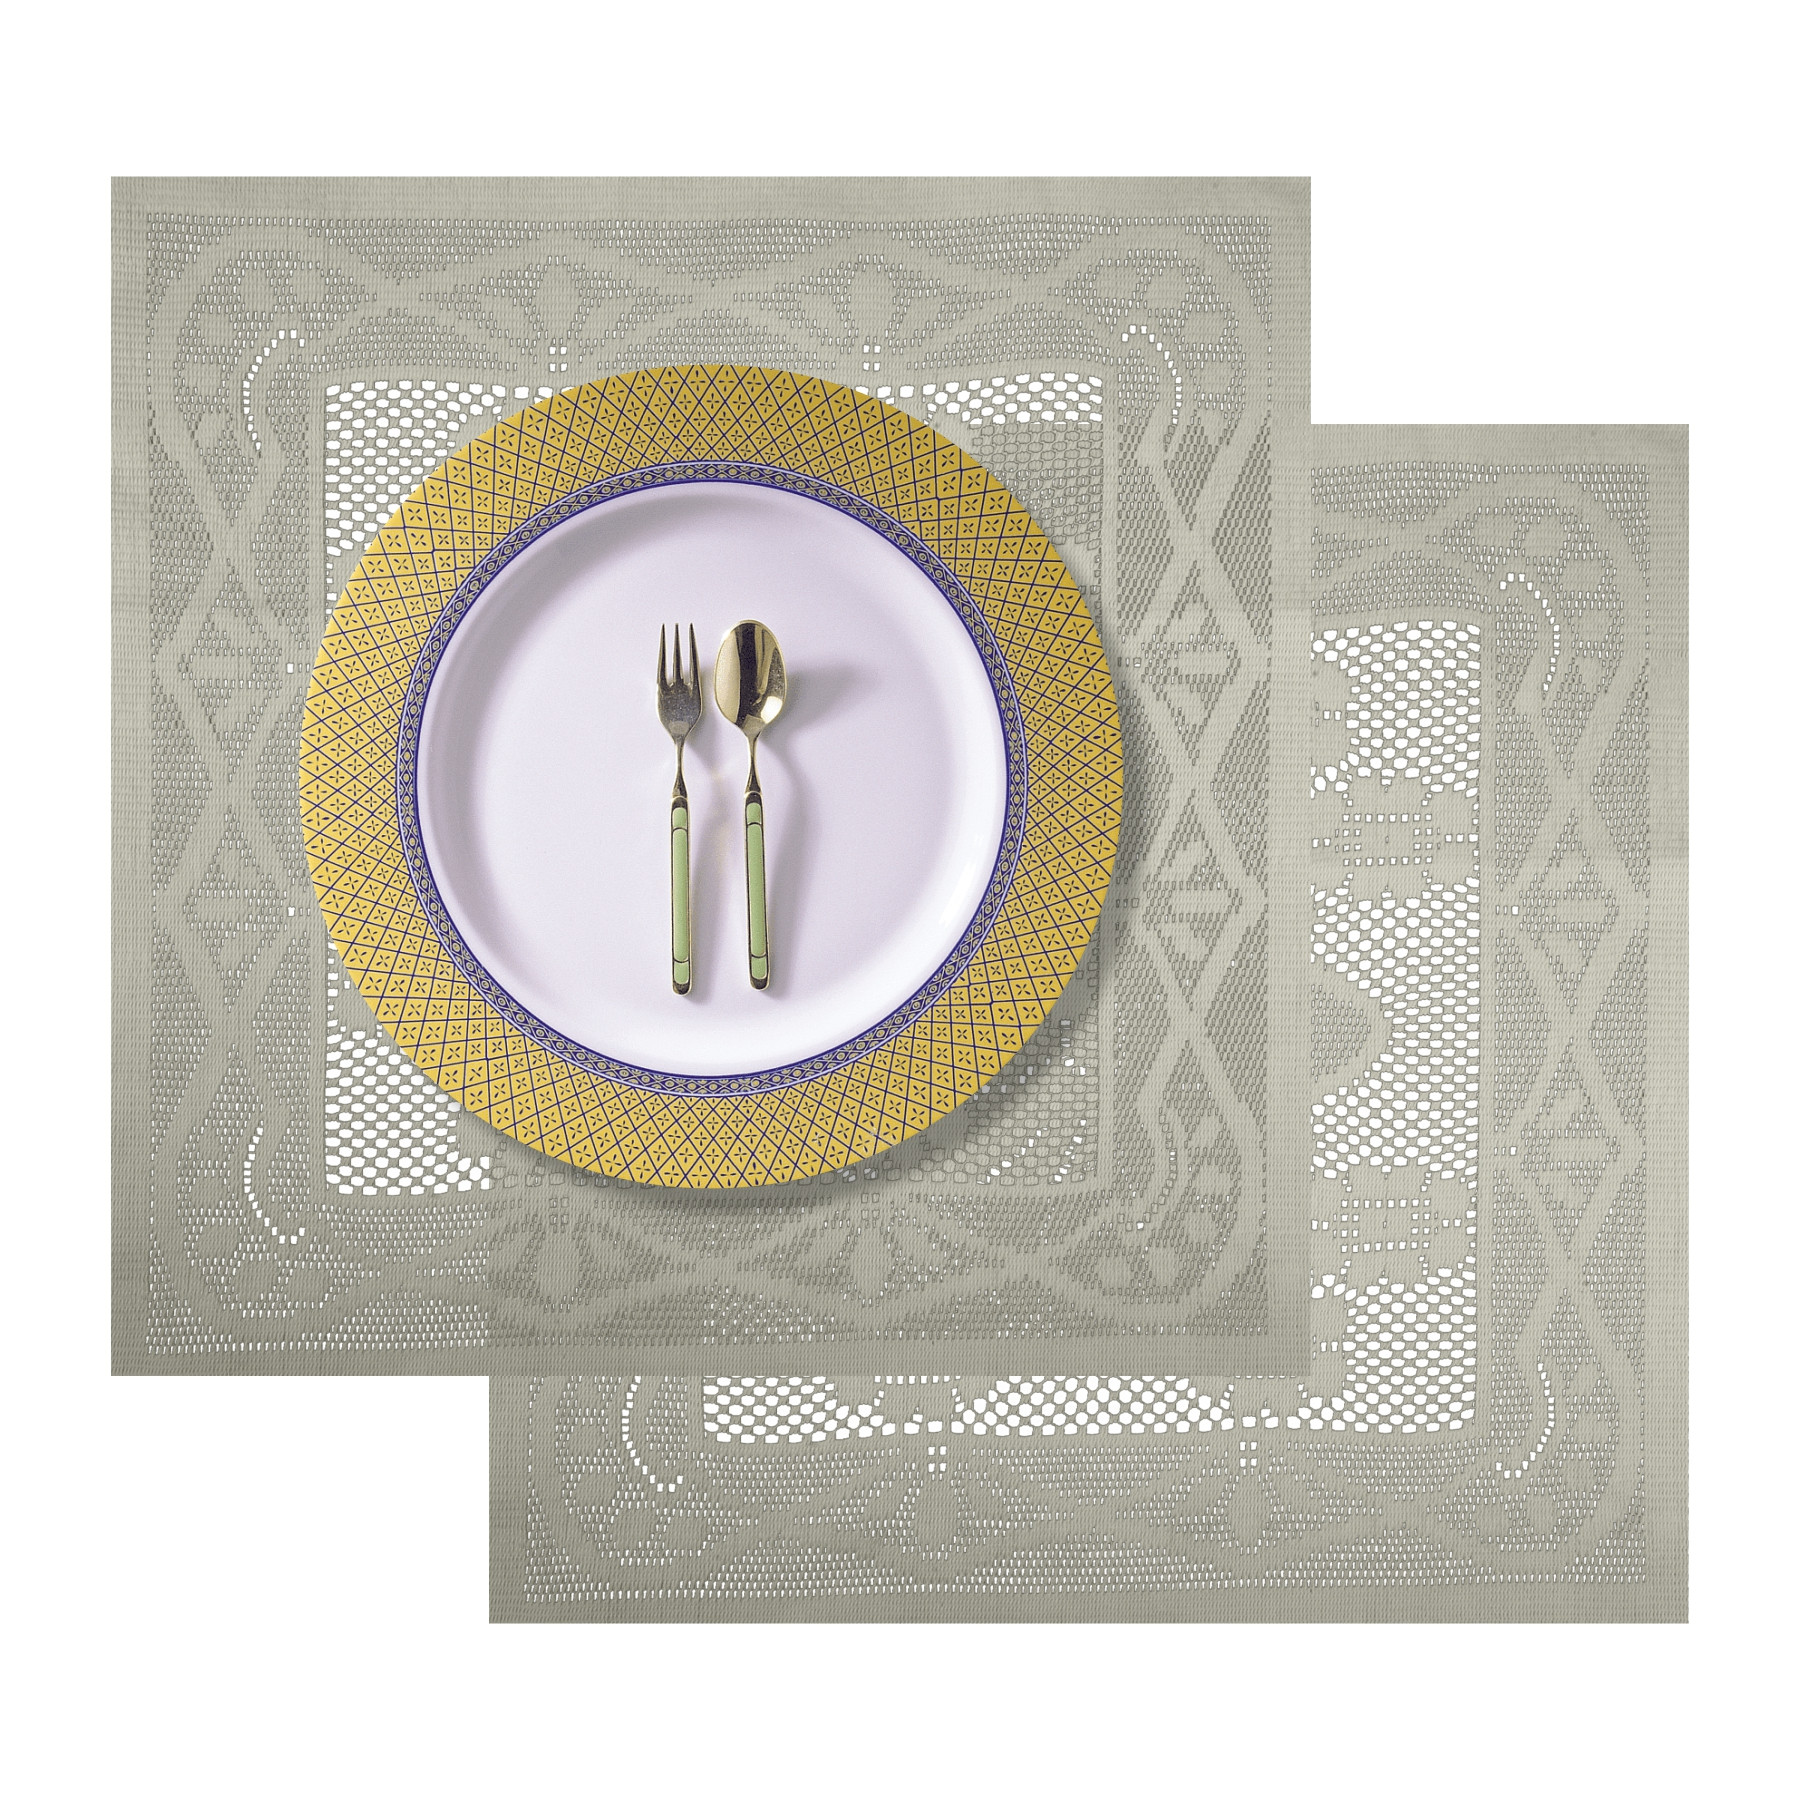 Kuber Industries Placemat | Dining Table Placemat | Center Table Mats | Square Plain Net Placemat Set | Side Table Placemats for Hotel-Home Décor | 20 Inch |Cream